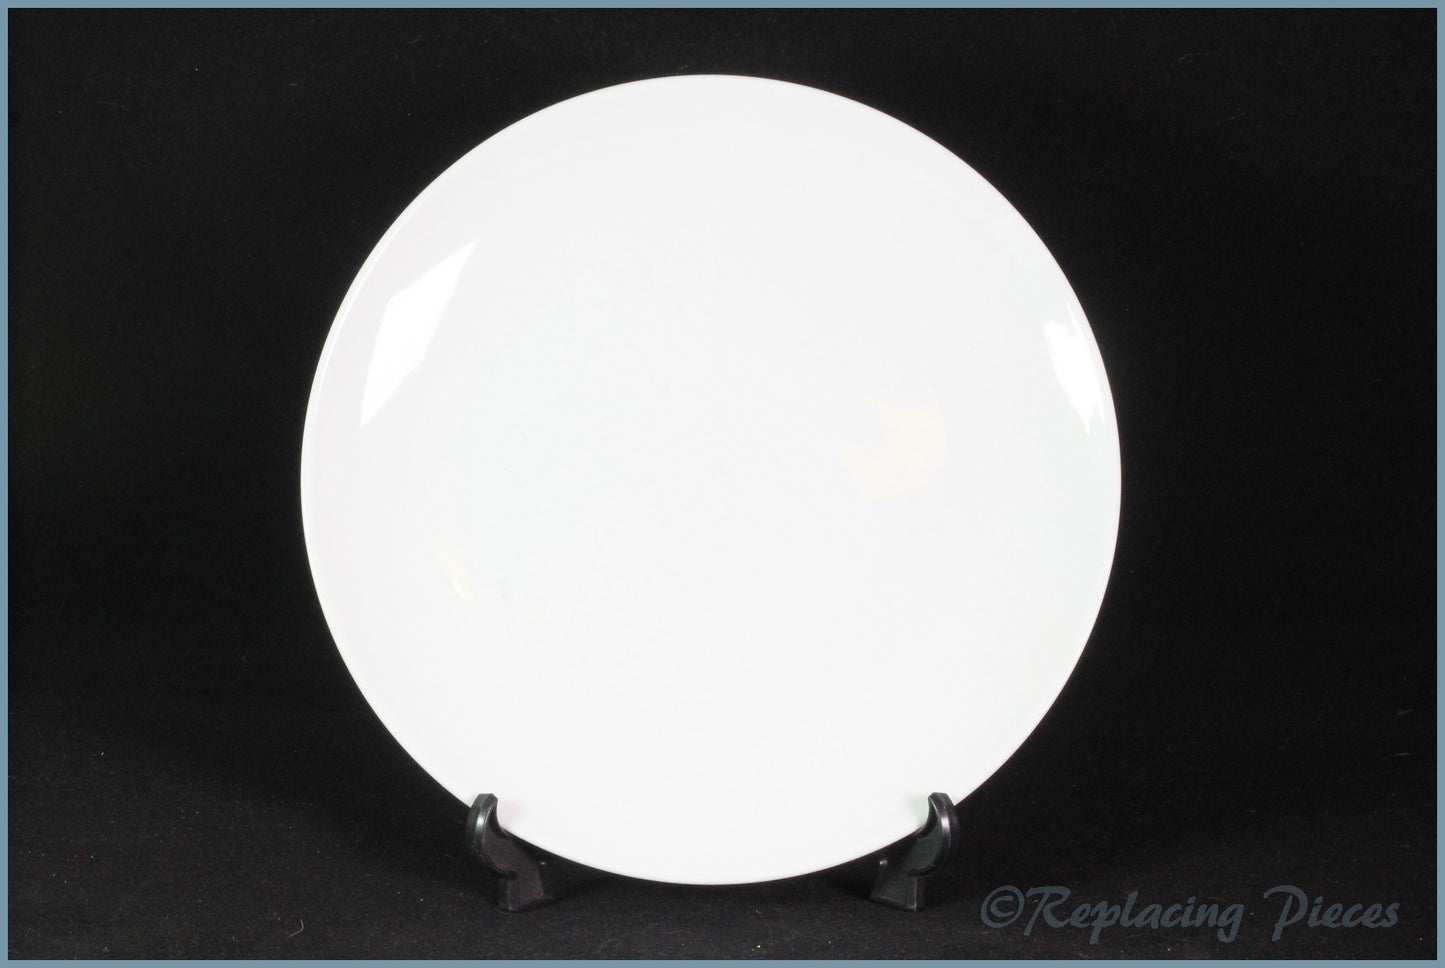 Marks & Spencer - White Essentials - 7 1/2" Side Plate (Coupe Shape)